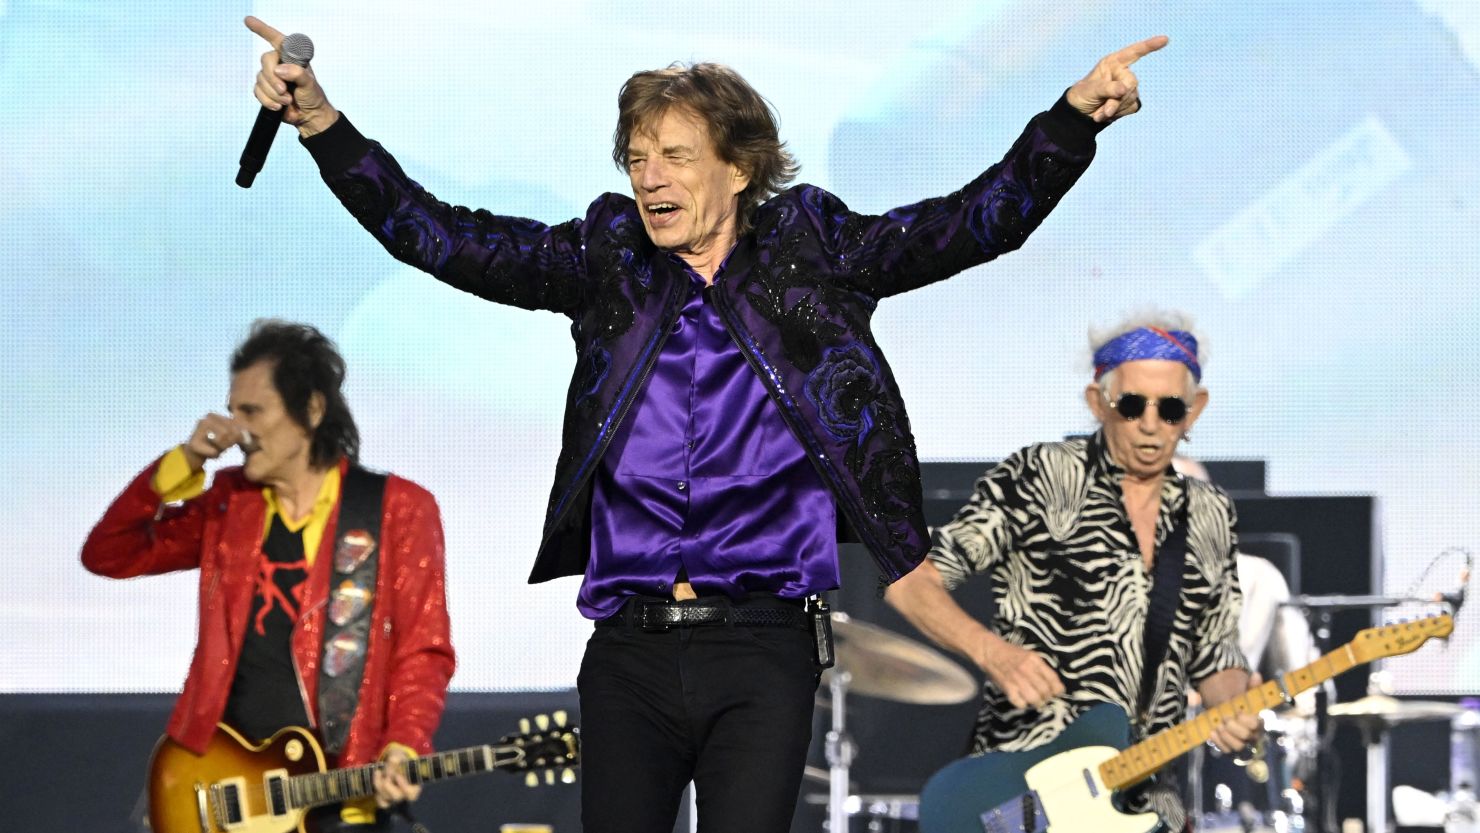 (L-R) Ronnie Wood, Mick Jagger and Keith Richards of British rock band the Rolling Stones perform on stage at the Ernst-Happel-Stadion in Vienna, Austria on July 15, 2022. - - Austria OUT (Photo by HANS KLAUS TECHT / APA / AFP) / Austria OUT (Photo by HANS KLAUS TECHT/APA/AFP via Getty Images)